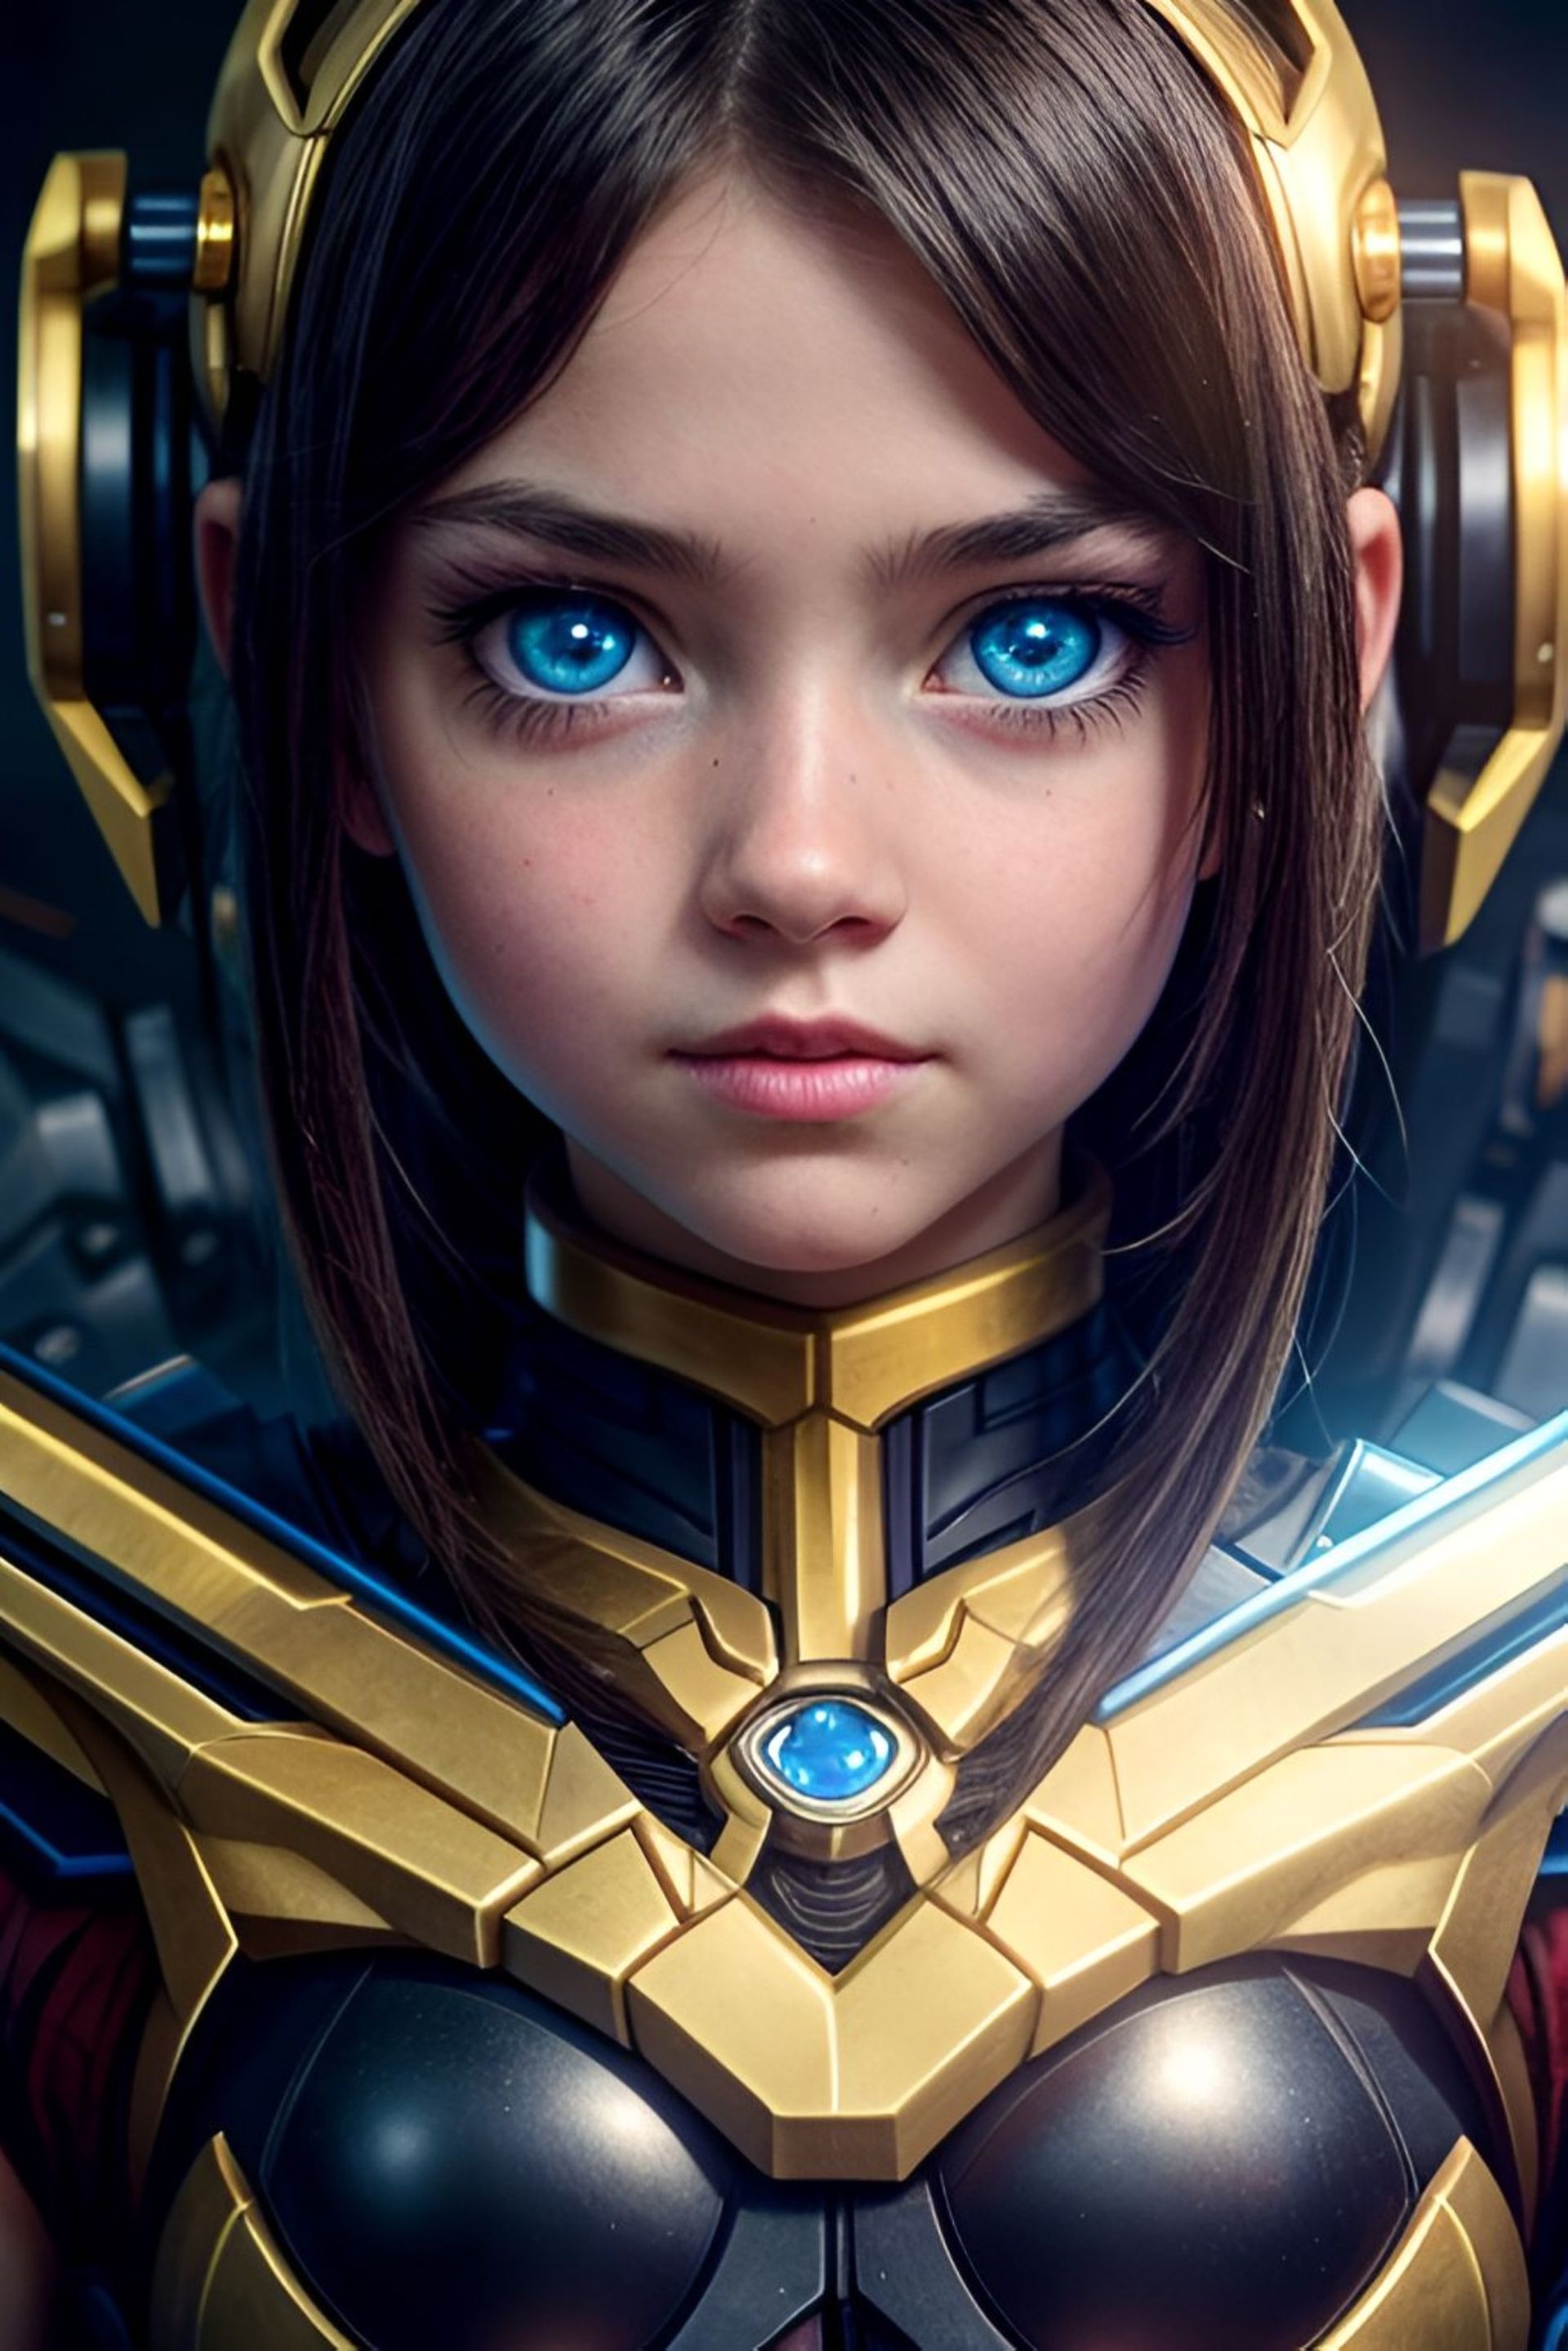 A girl, a robot, with brown hair and blue eyes.